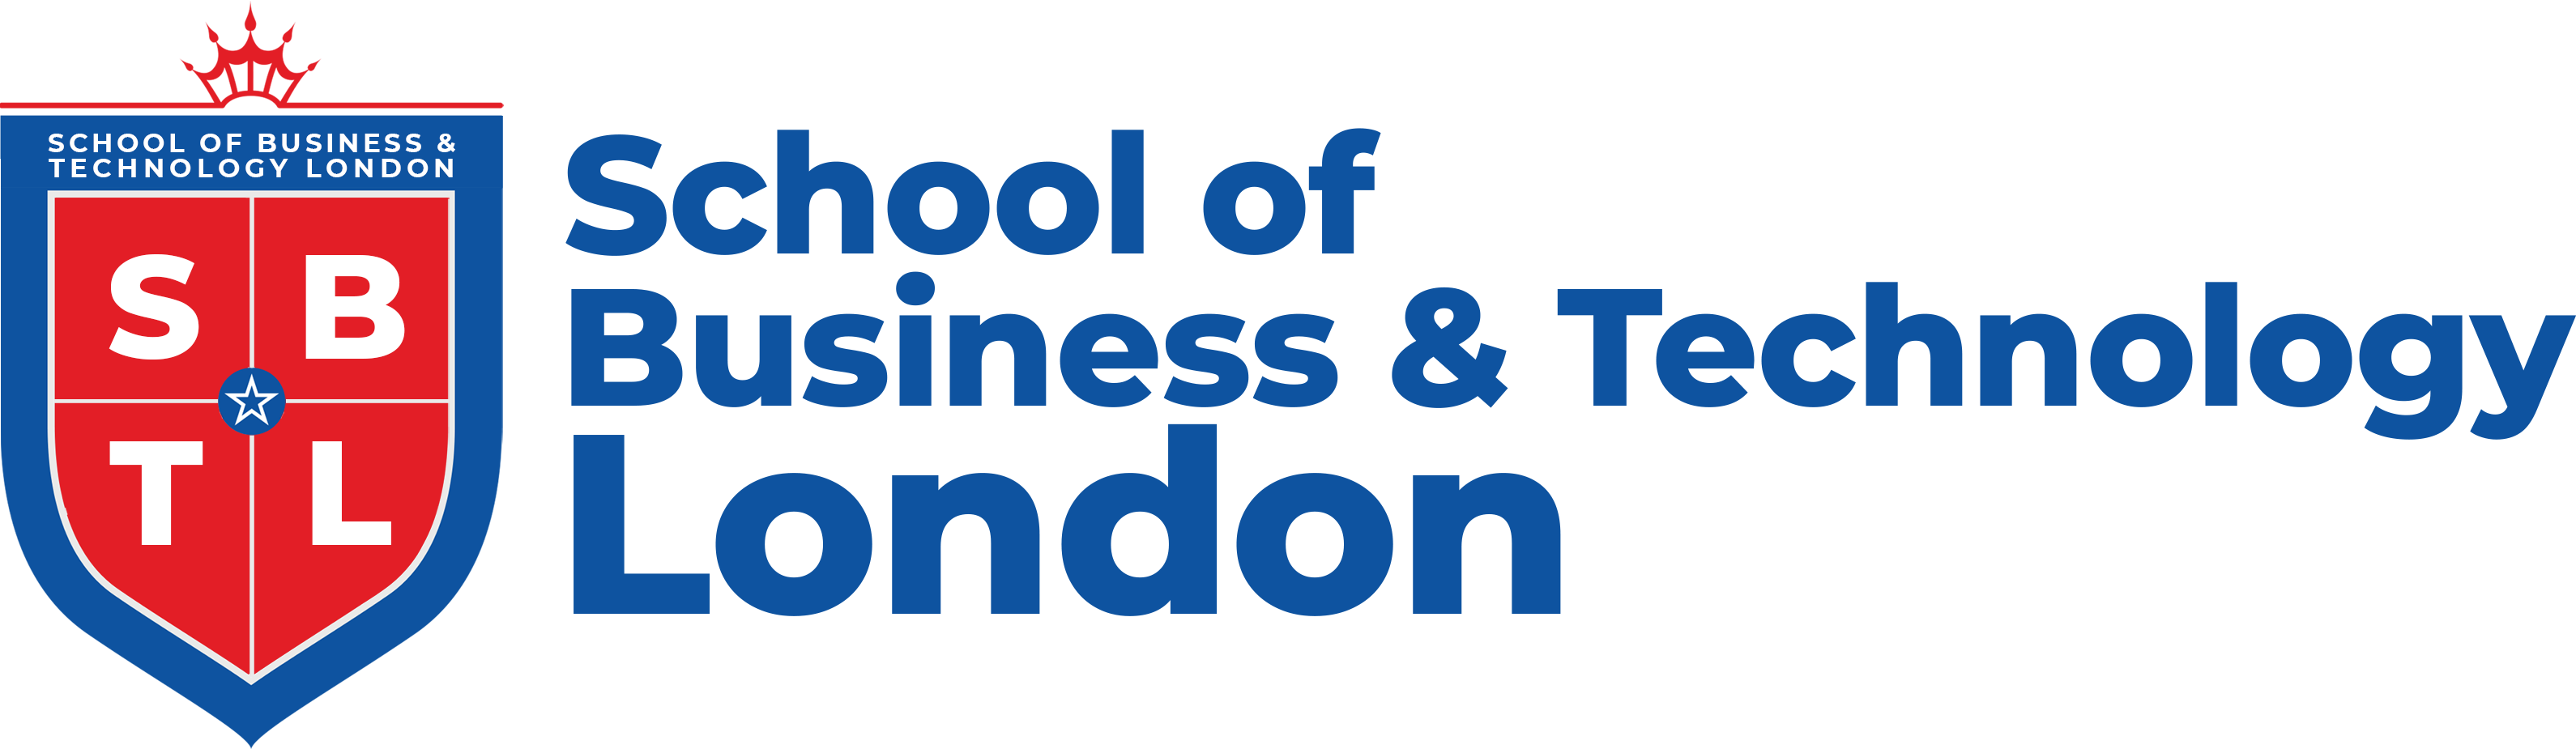 School of business and technology london